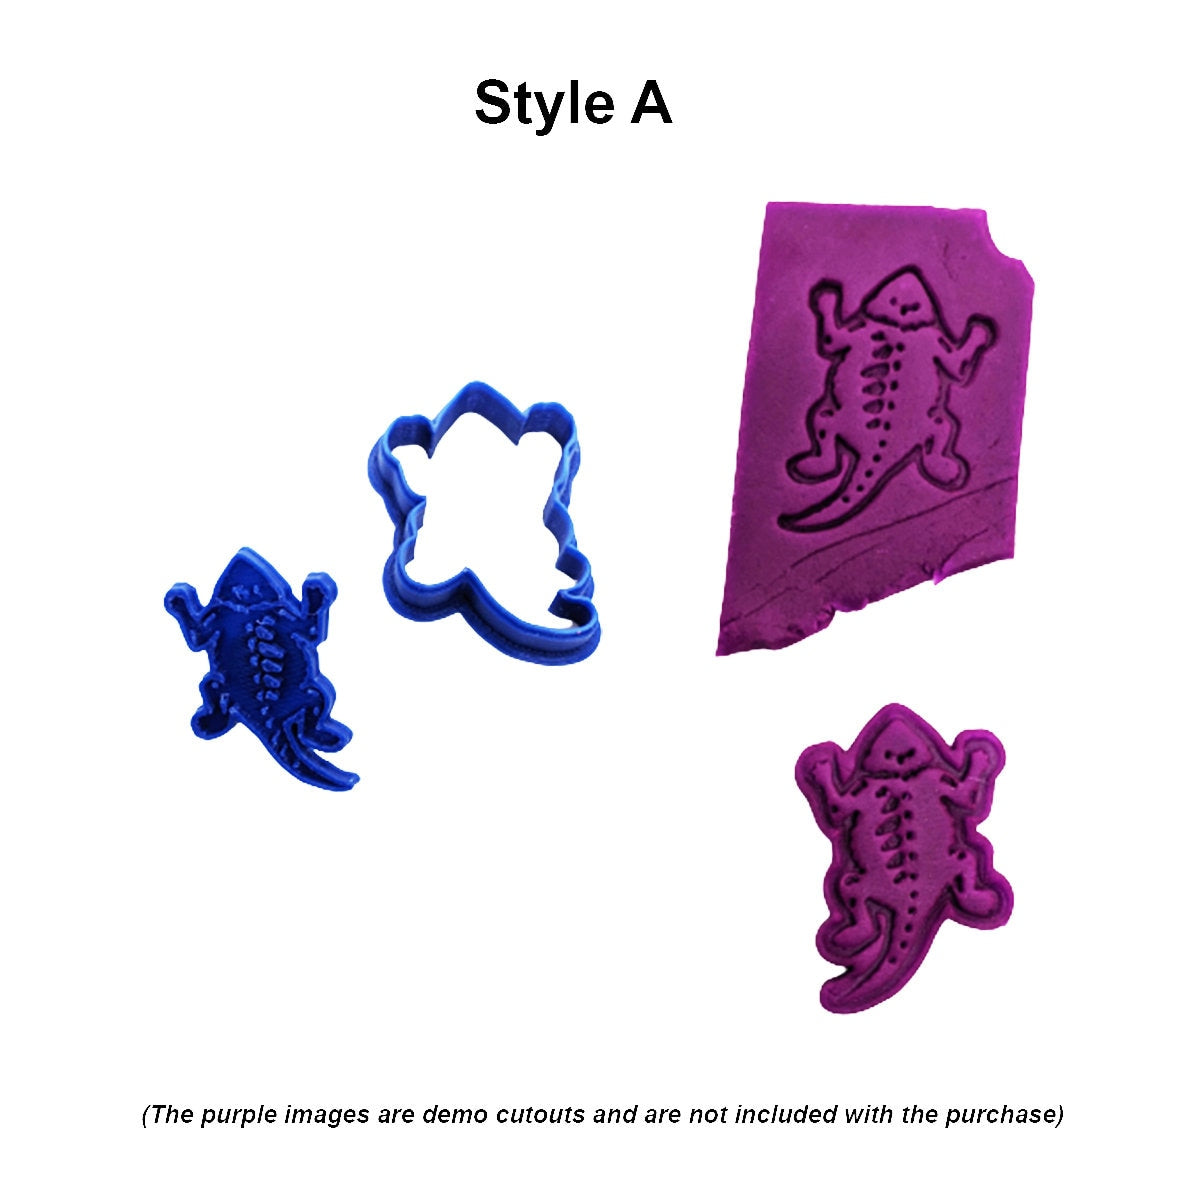 TCU Cookie Cutter & Stamp Set 4 Style Options